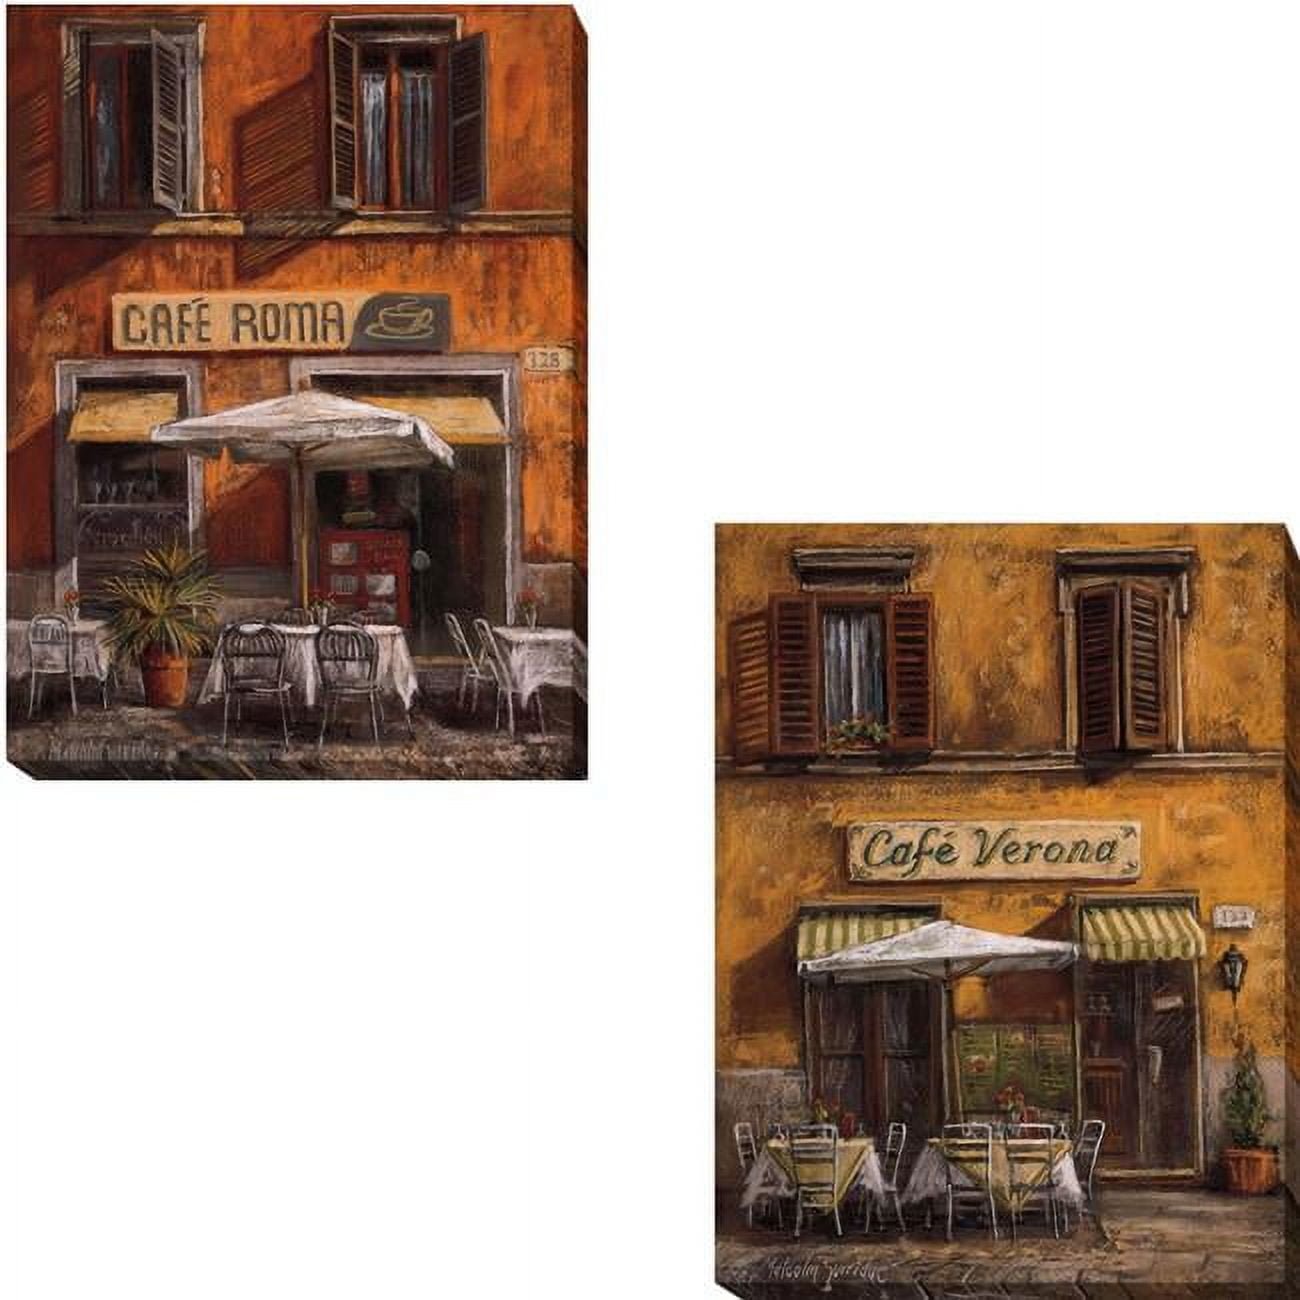 1216pj437cg Cafe Roma & Cafe Verona By Malcolm Surridge 2-piece Premium Gallery-wrapped Canvas Giclee Art Set - 12 X 16 X 1.5 In.